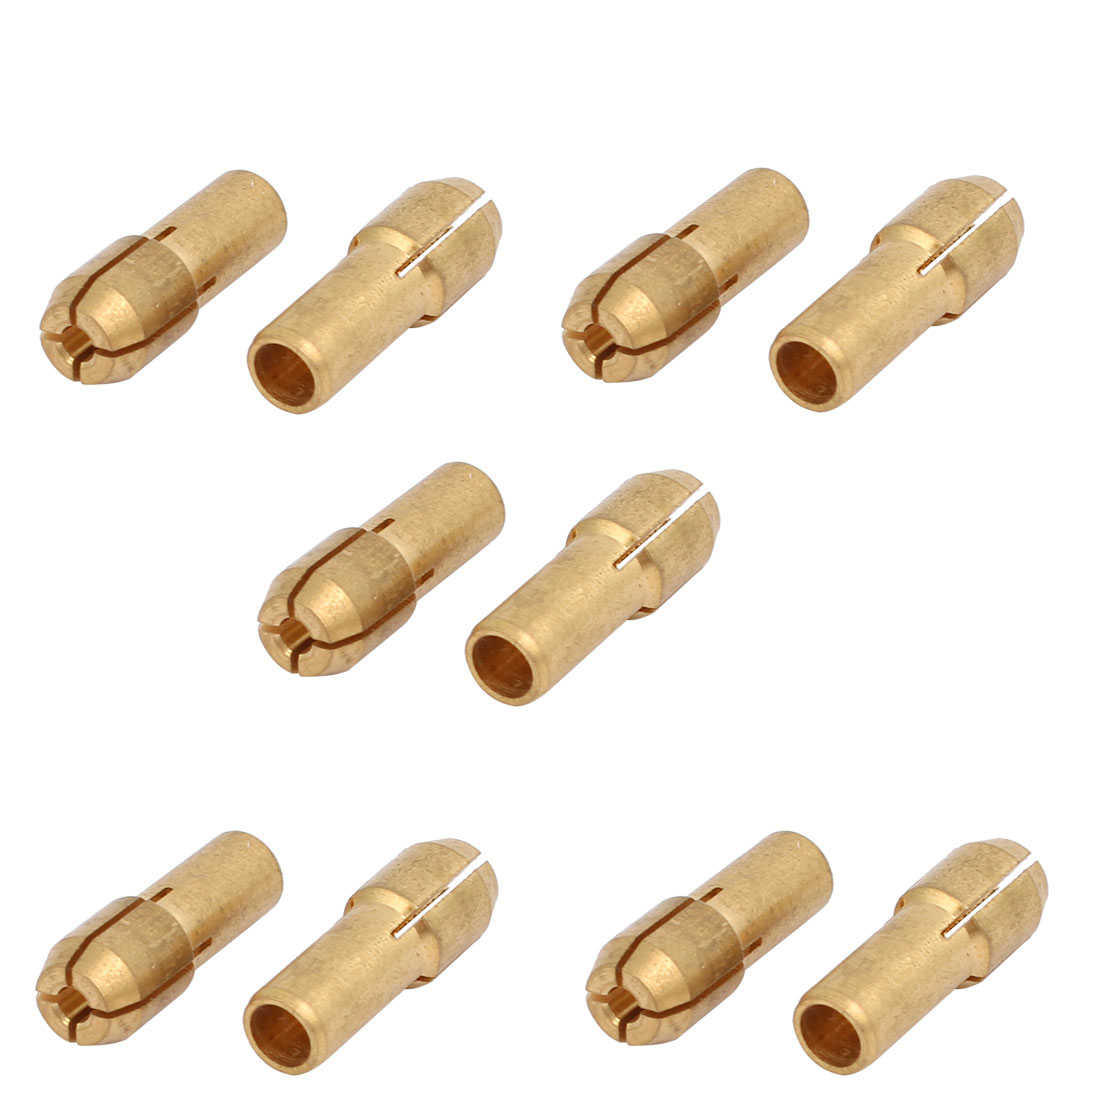 Unique Bargains 10pcs 1.8mm Clamping Dia Brass Qucik Change Collet Nut for Rotary Power Tool